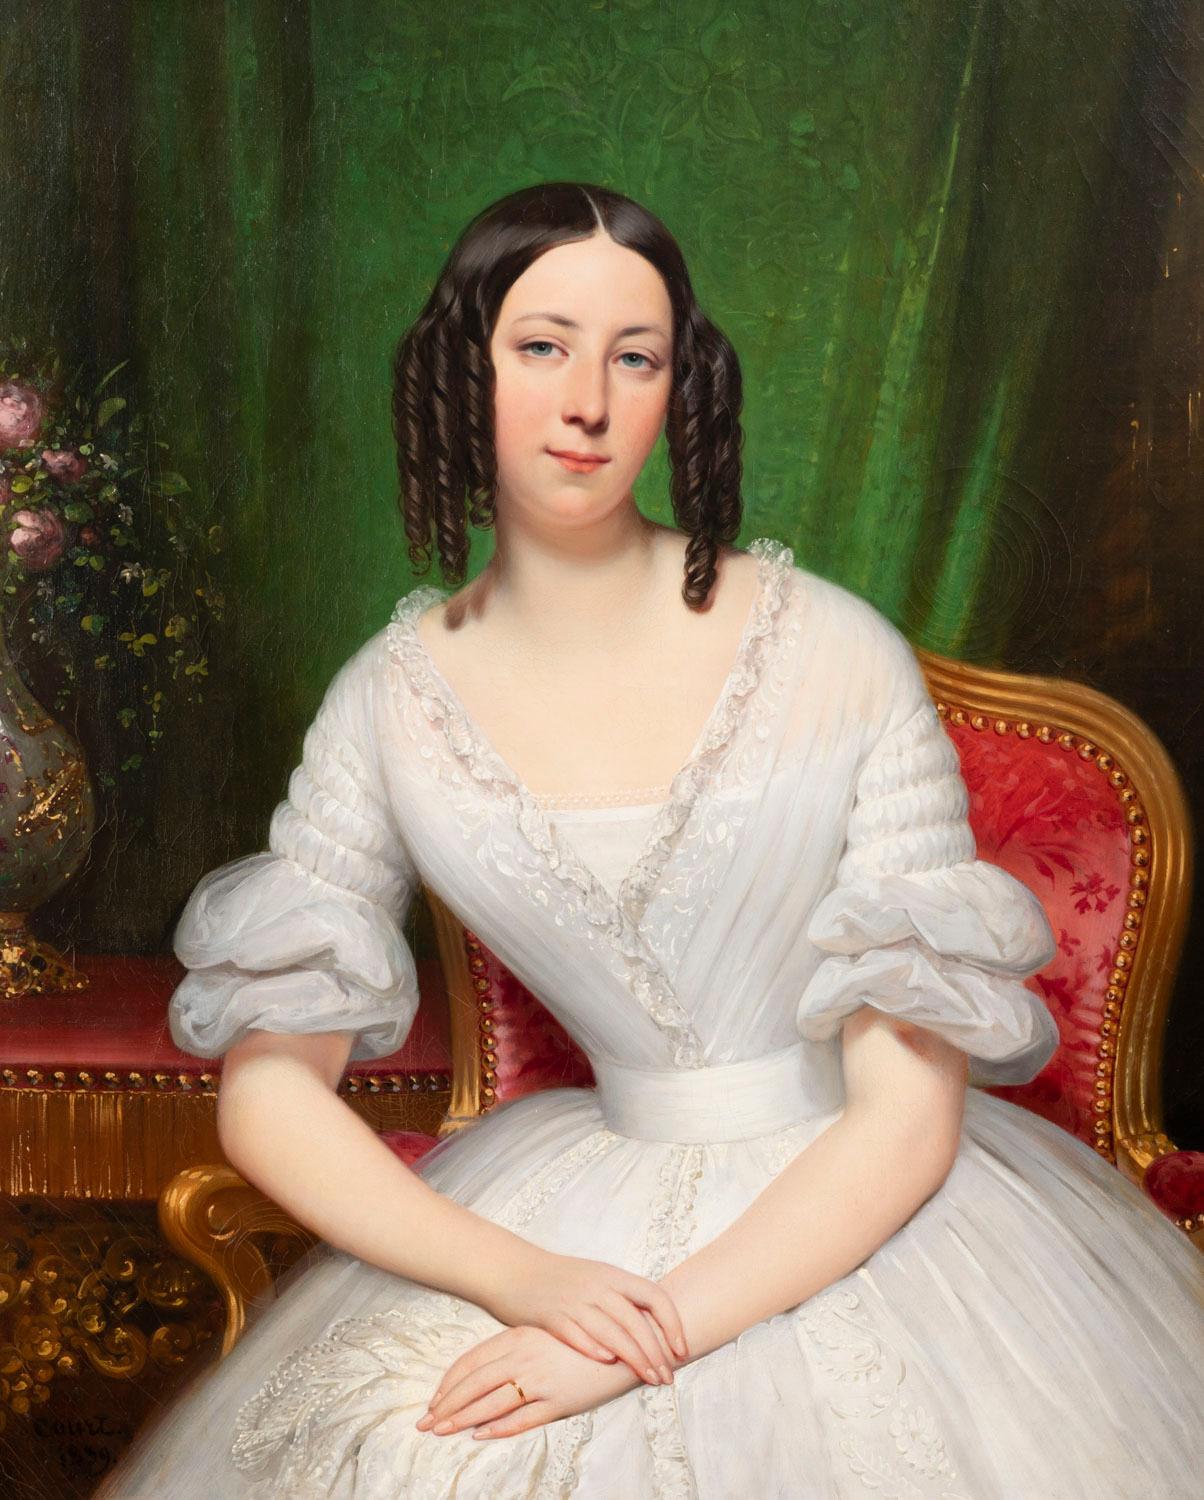 High quality portrait representing a young woman wearing a white dress in a bourgeois interior. We must thank Mr. Jean Loup Legay, an expert on Joseph-Désiré Court, for identifying the model:
Mrs. Louise-Marie-Eléonore Poulet, daughter of the mayor